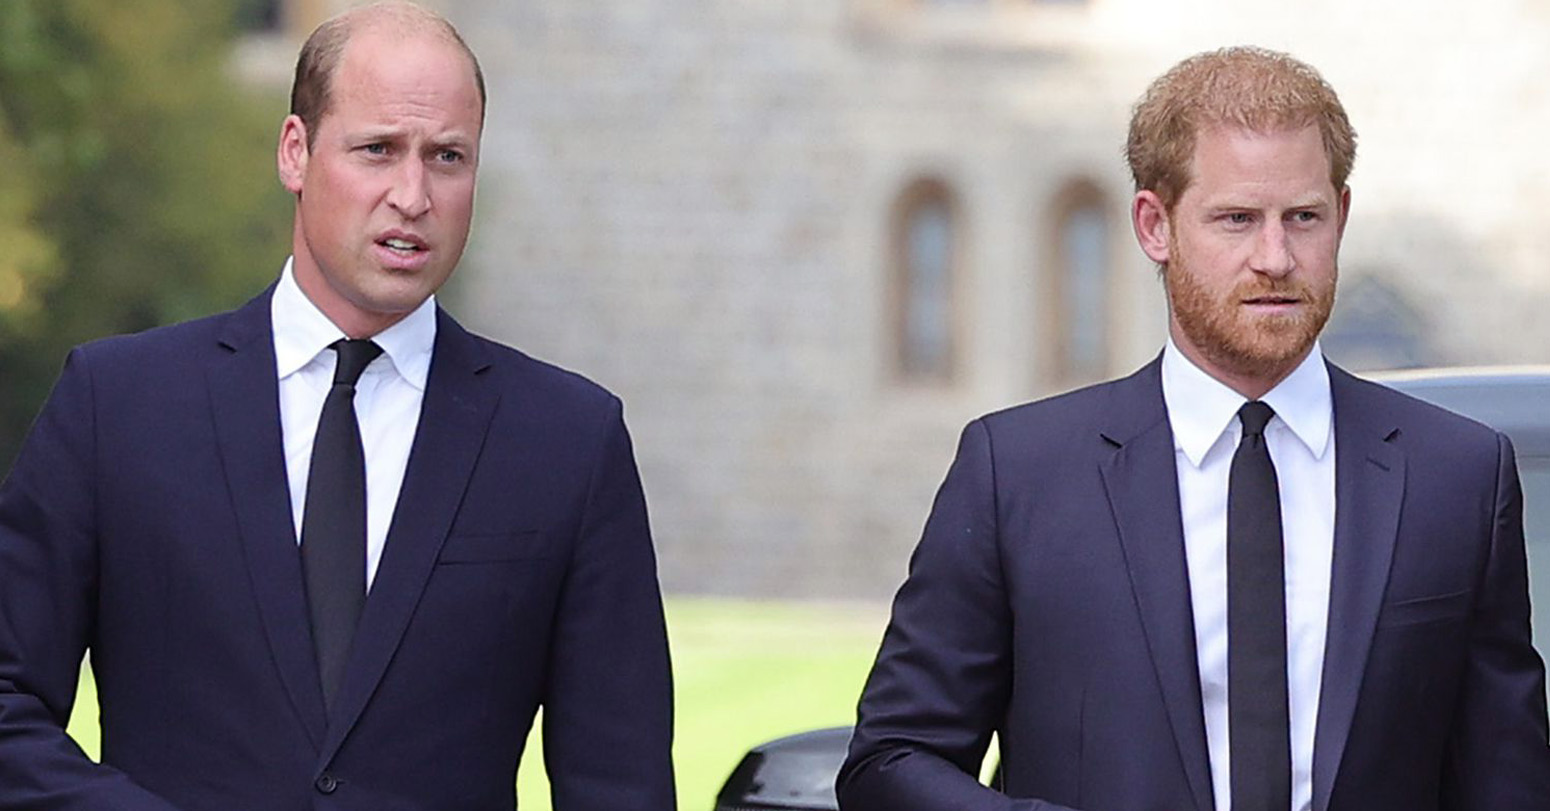 Harry claims being lashed by Prince William